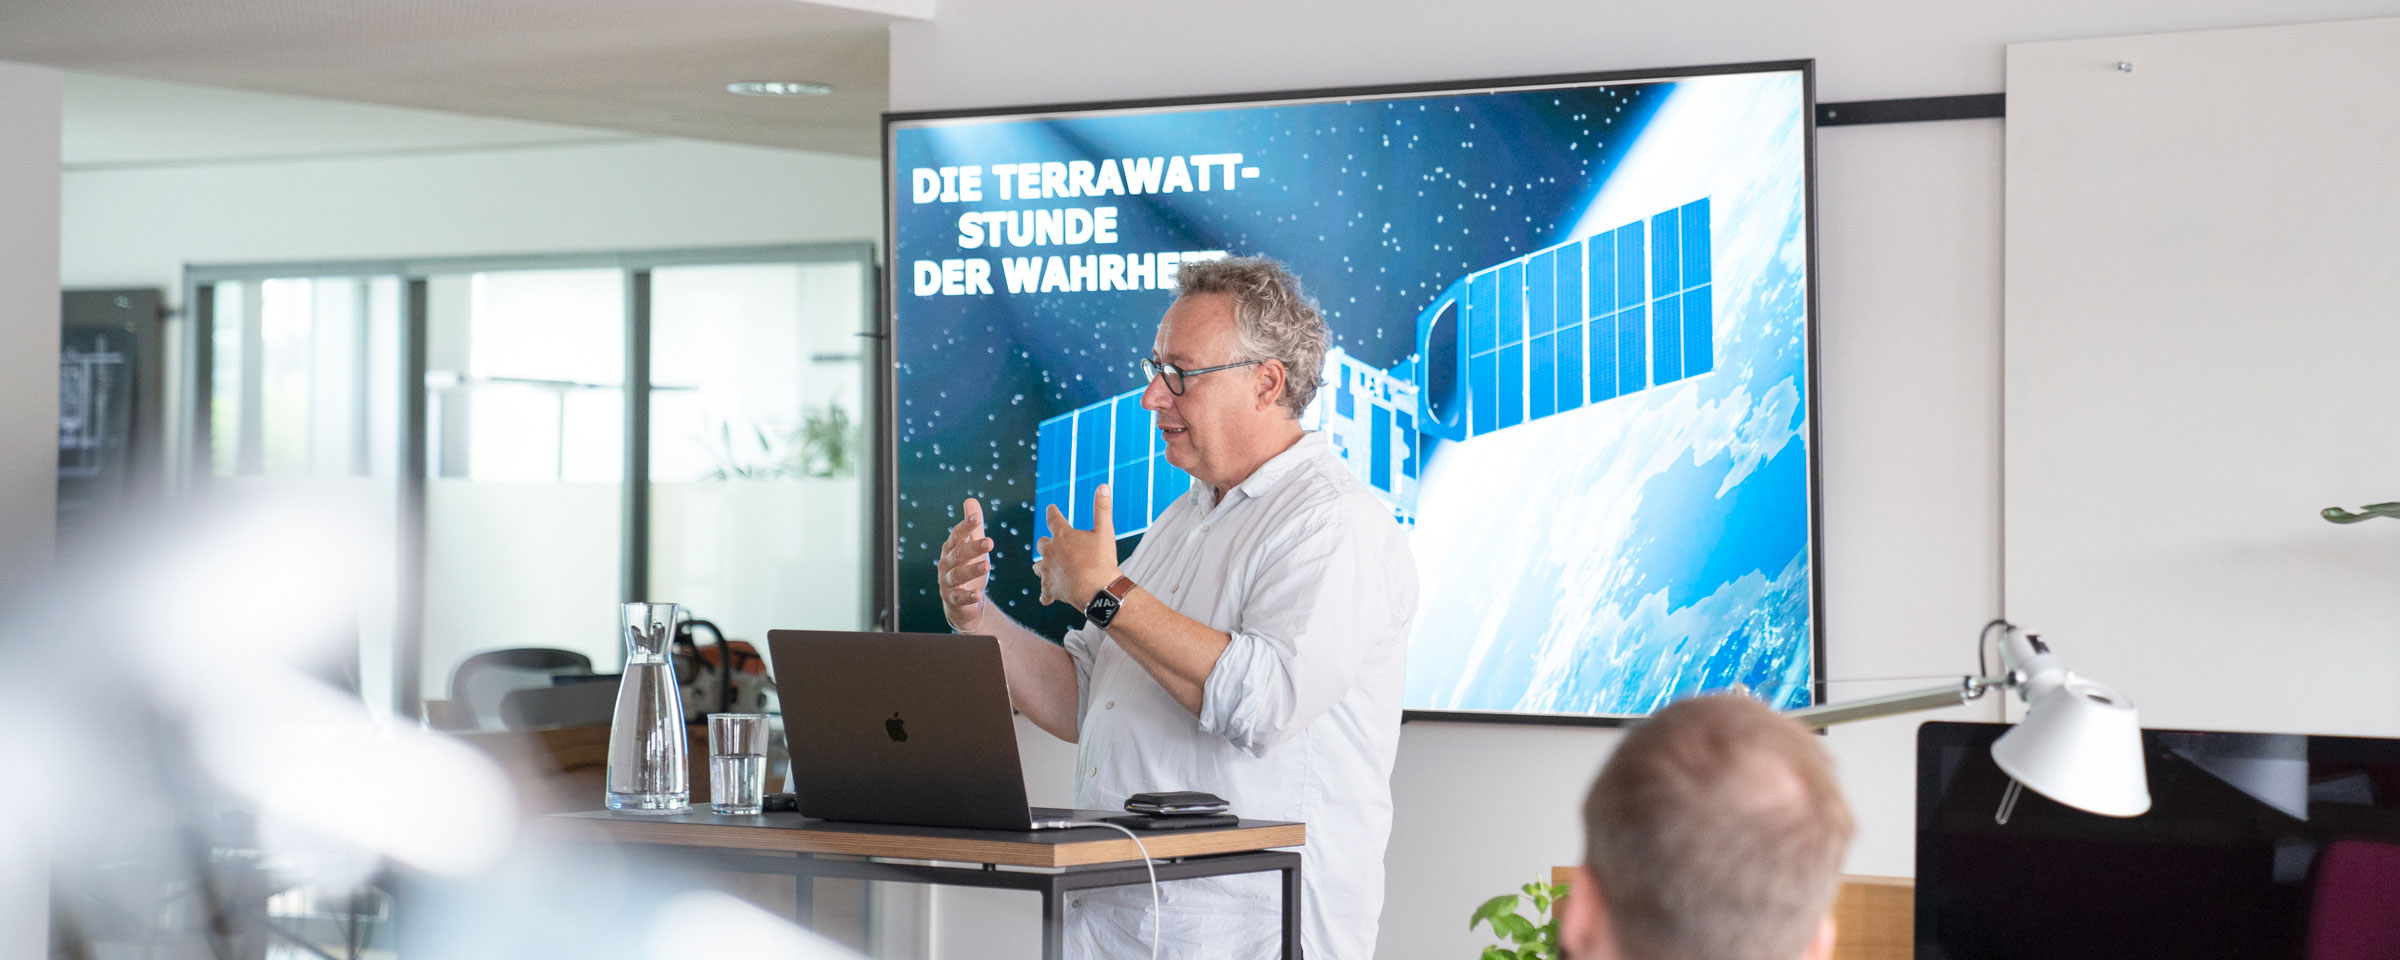 Alexander Voigt talks about innovation and the energy turnaround